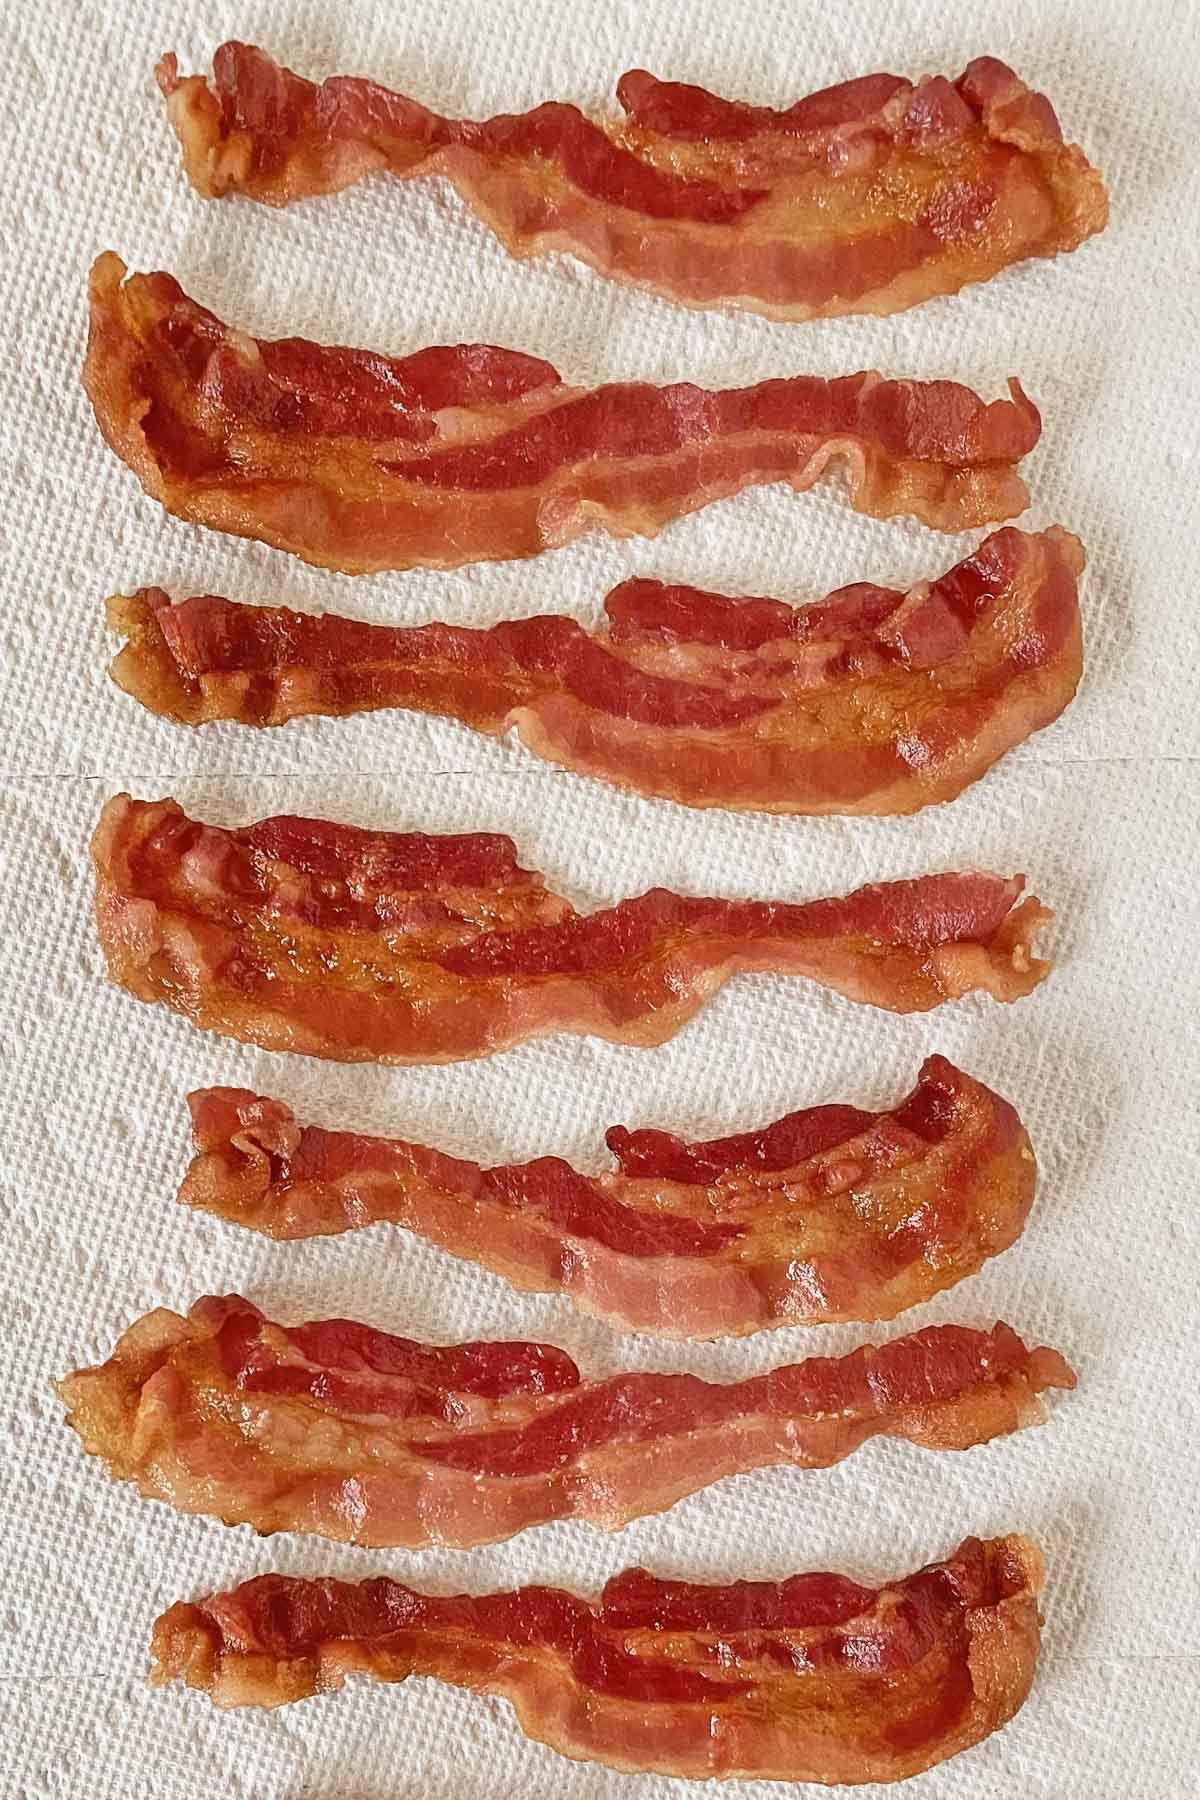 7 strips of cooked bacon draining on a paper towel